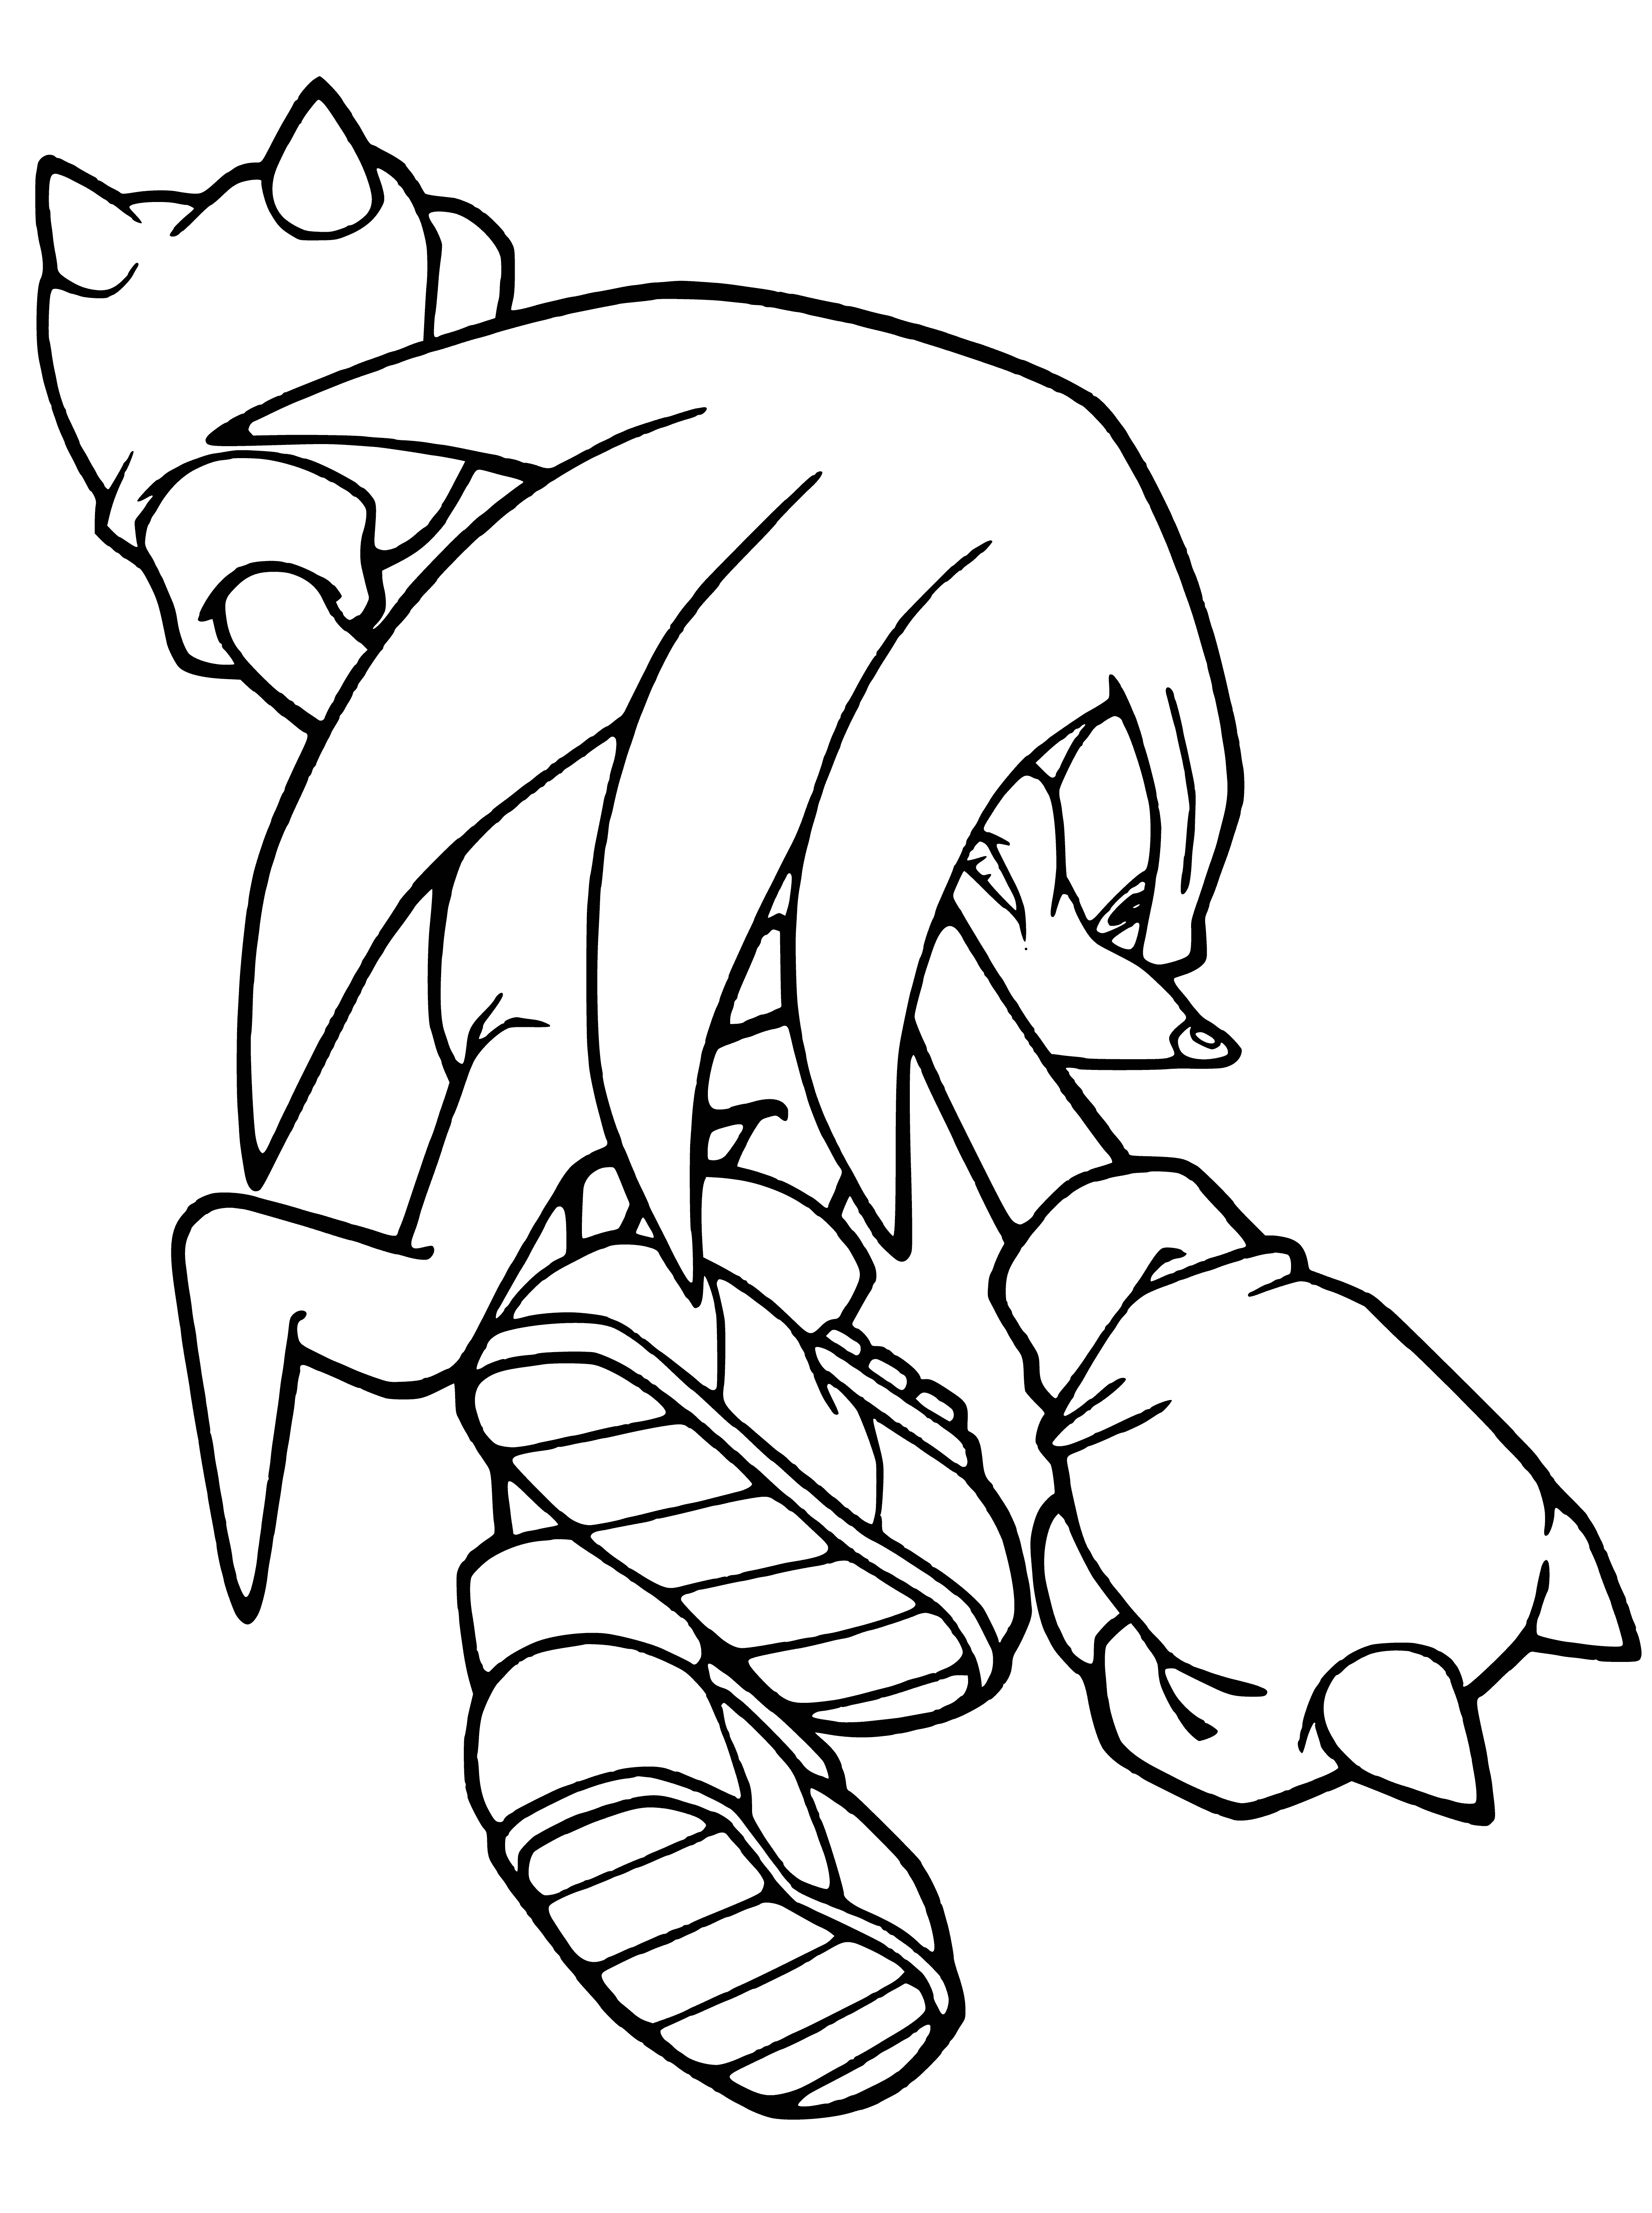 coloring page: Blue hedgehog holds gold ring, eyes closed in happiness, standing on green hill, blue sky, white clouds.